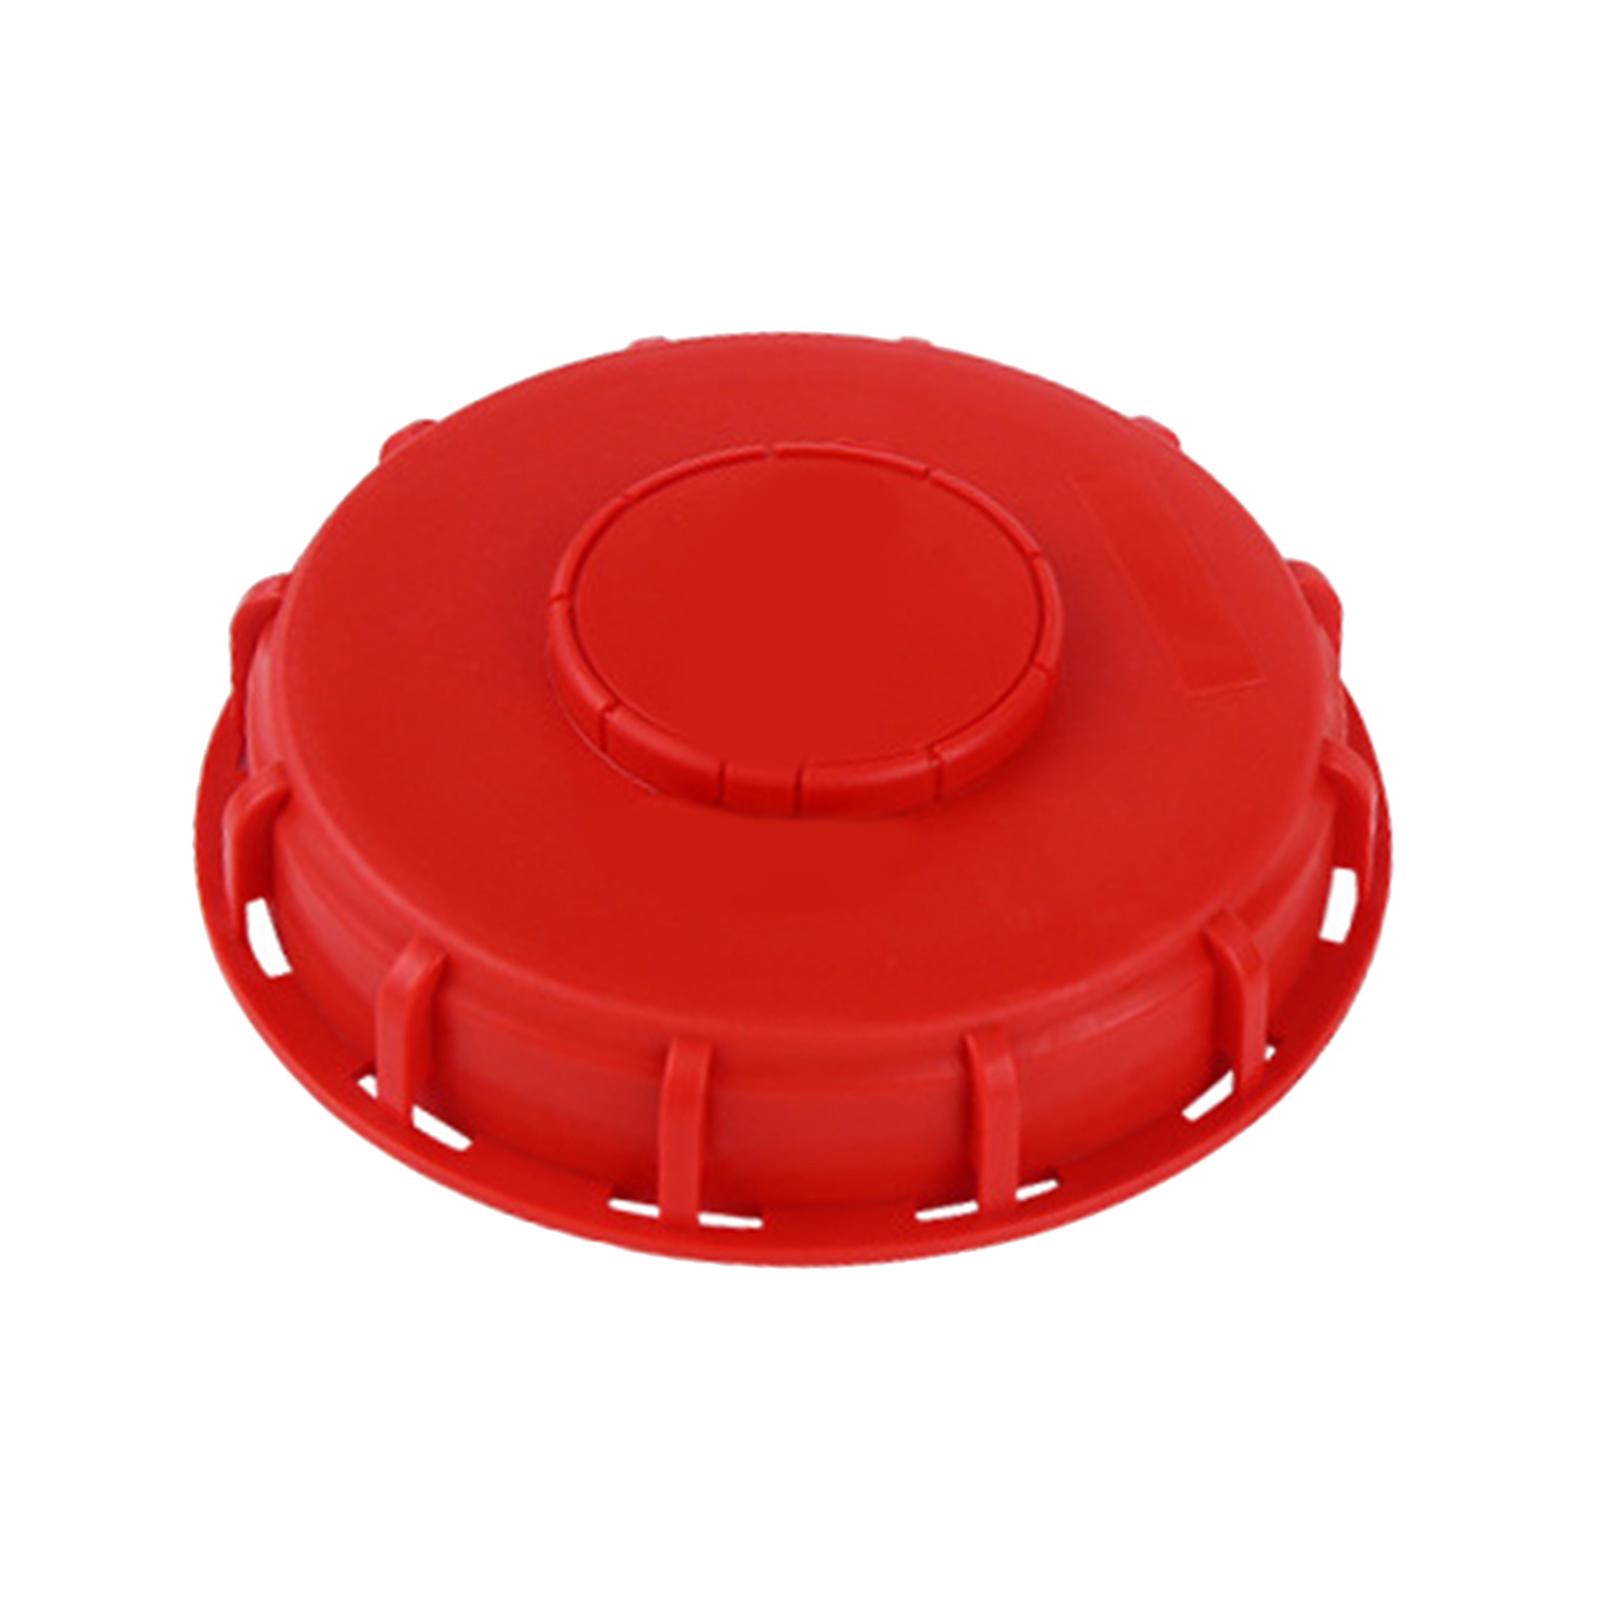 IBC Tote Lid Cover Parts Tank Cap for Home Garden Hose Faucet Valve Fittings Inner Dia 24.5cm